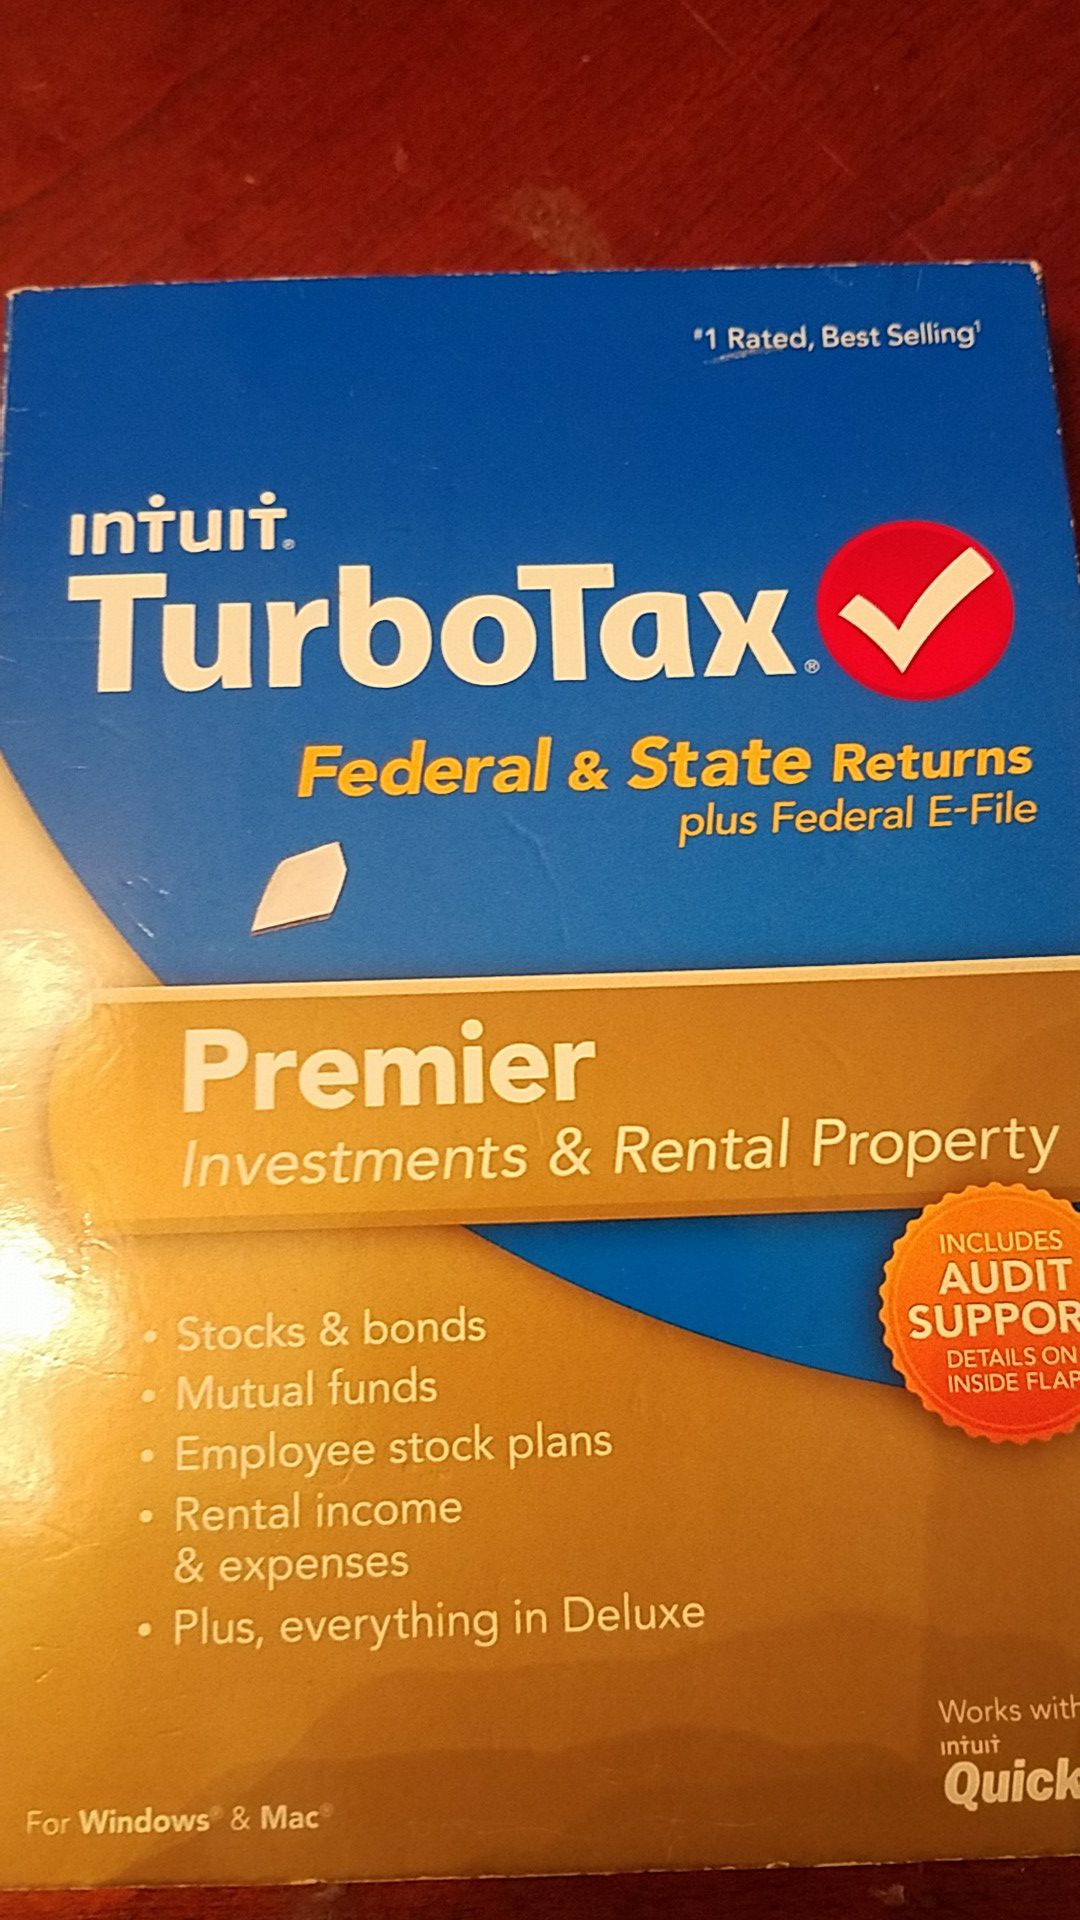 Intuit turbotax premier investments & rental property